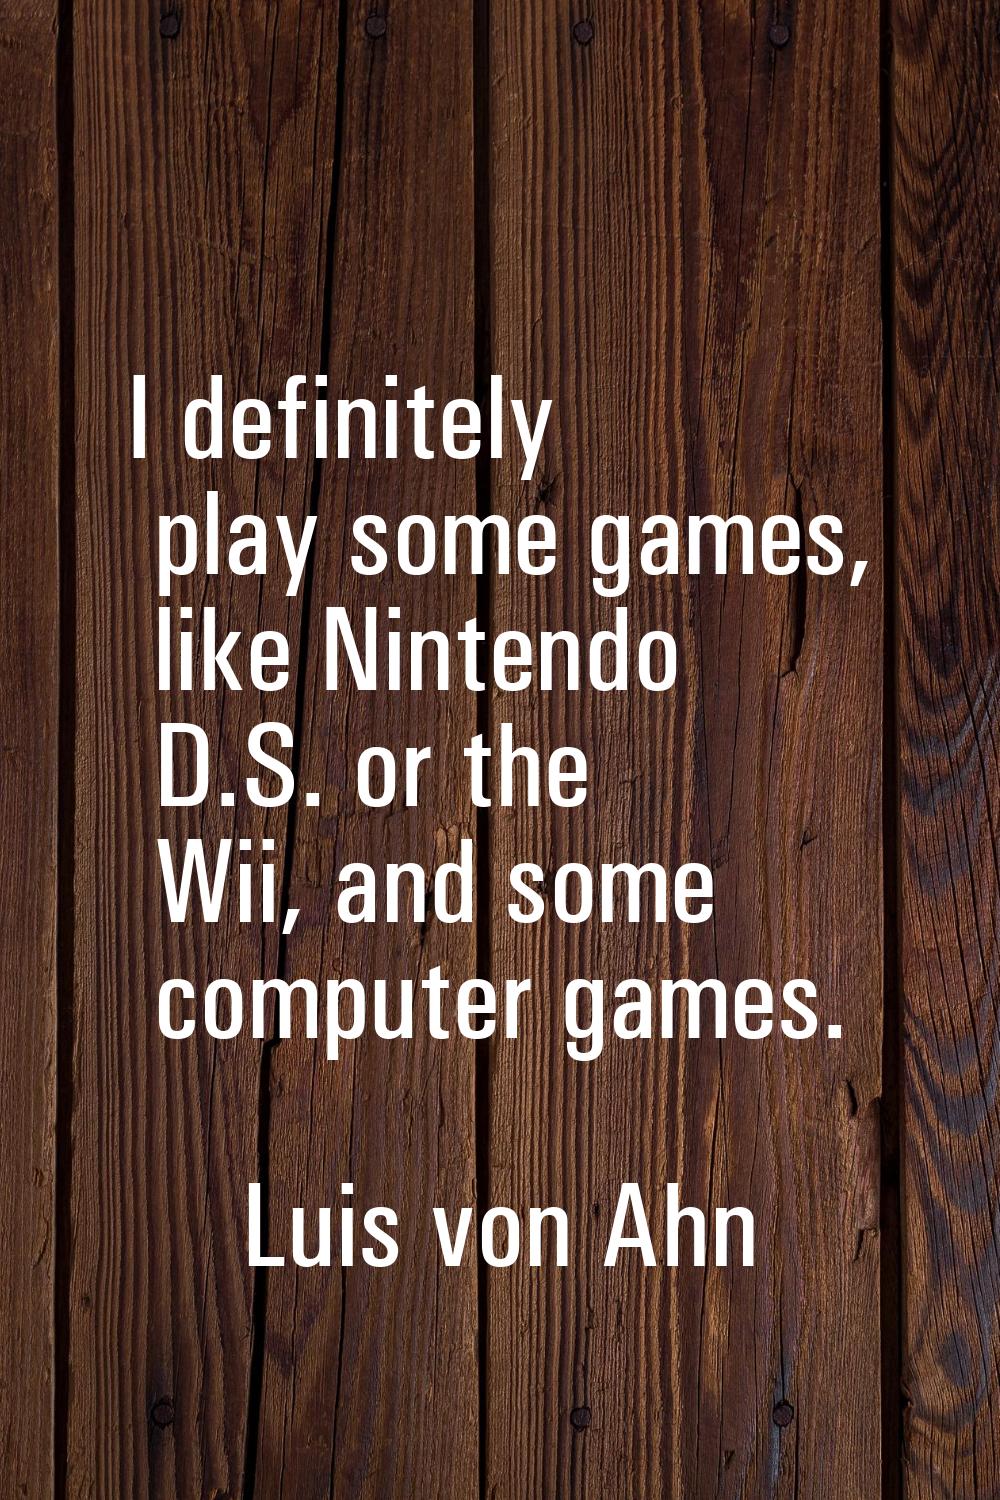 I definitely play some games, like Nintendo D.S. or the Wii, and some computer games.